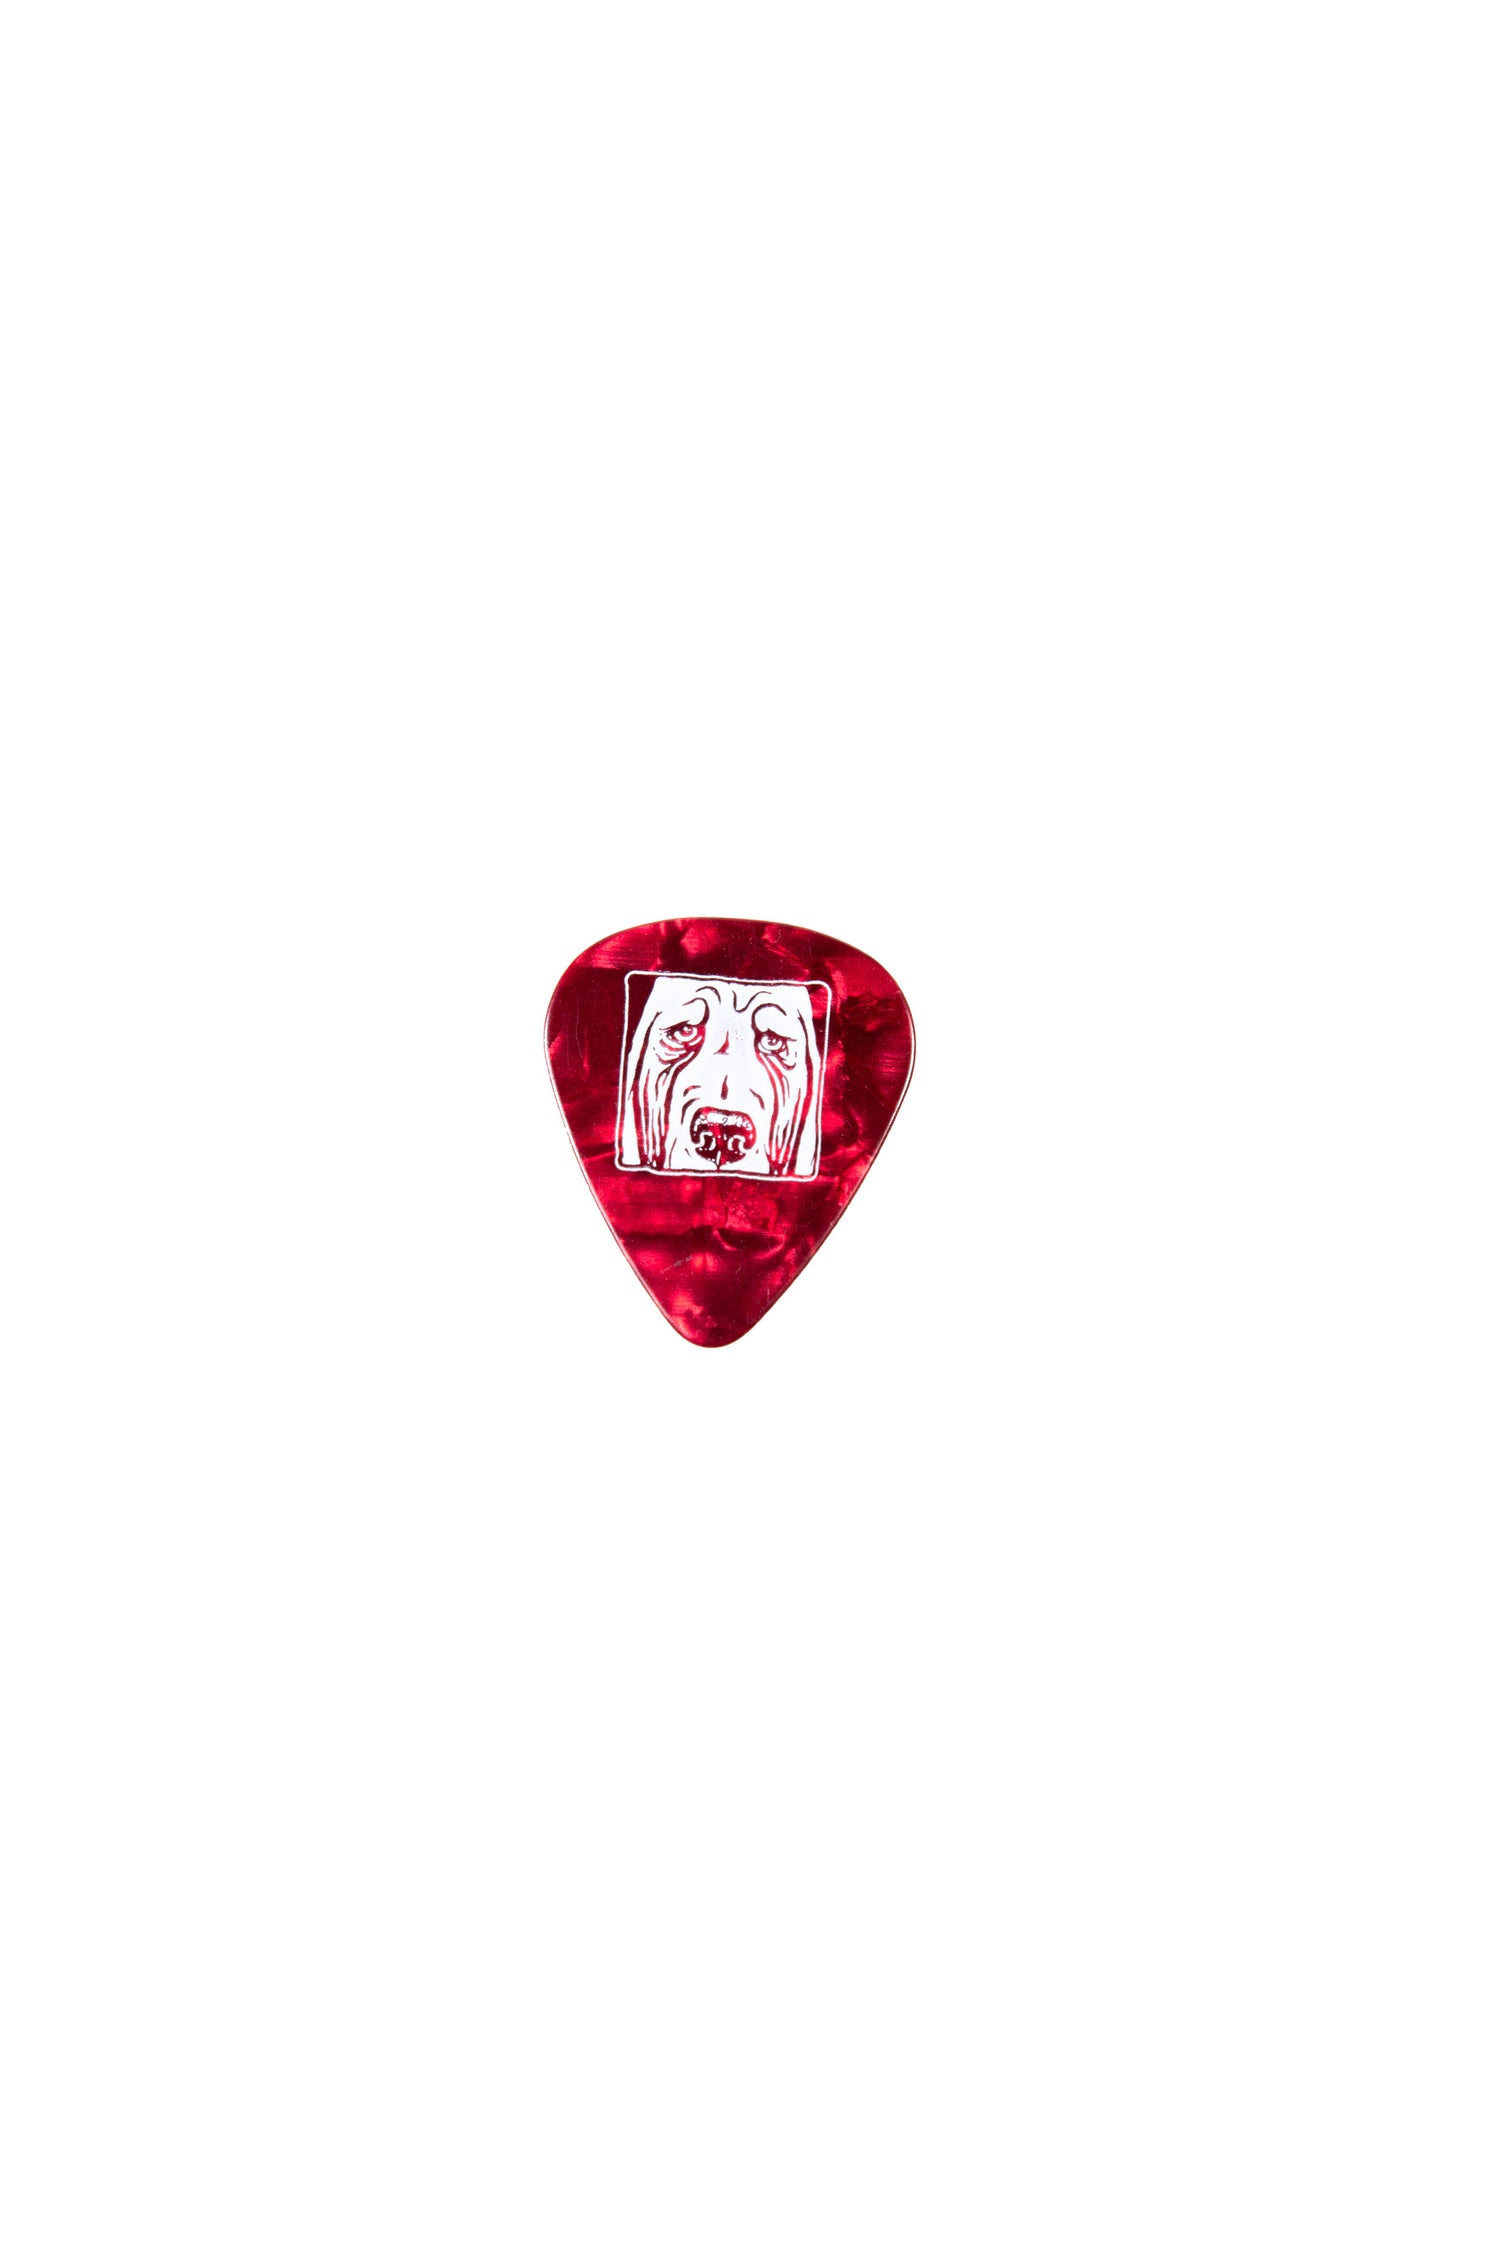 Ole Red Guitar Pick